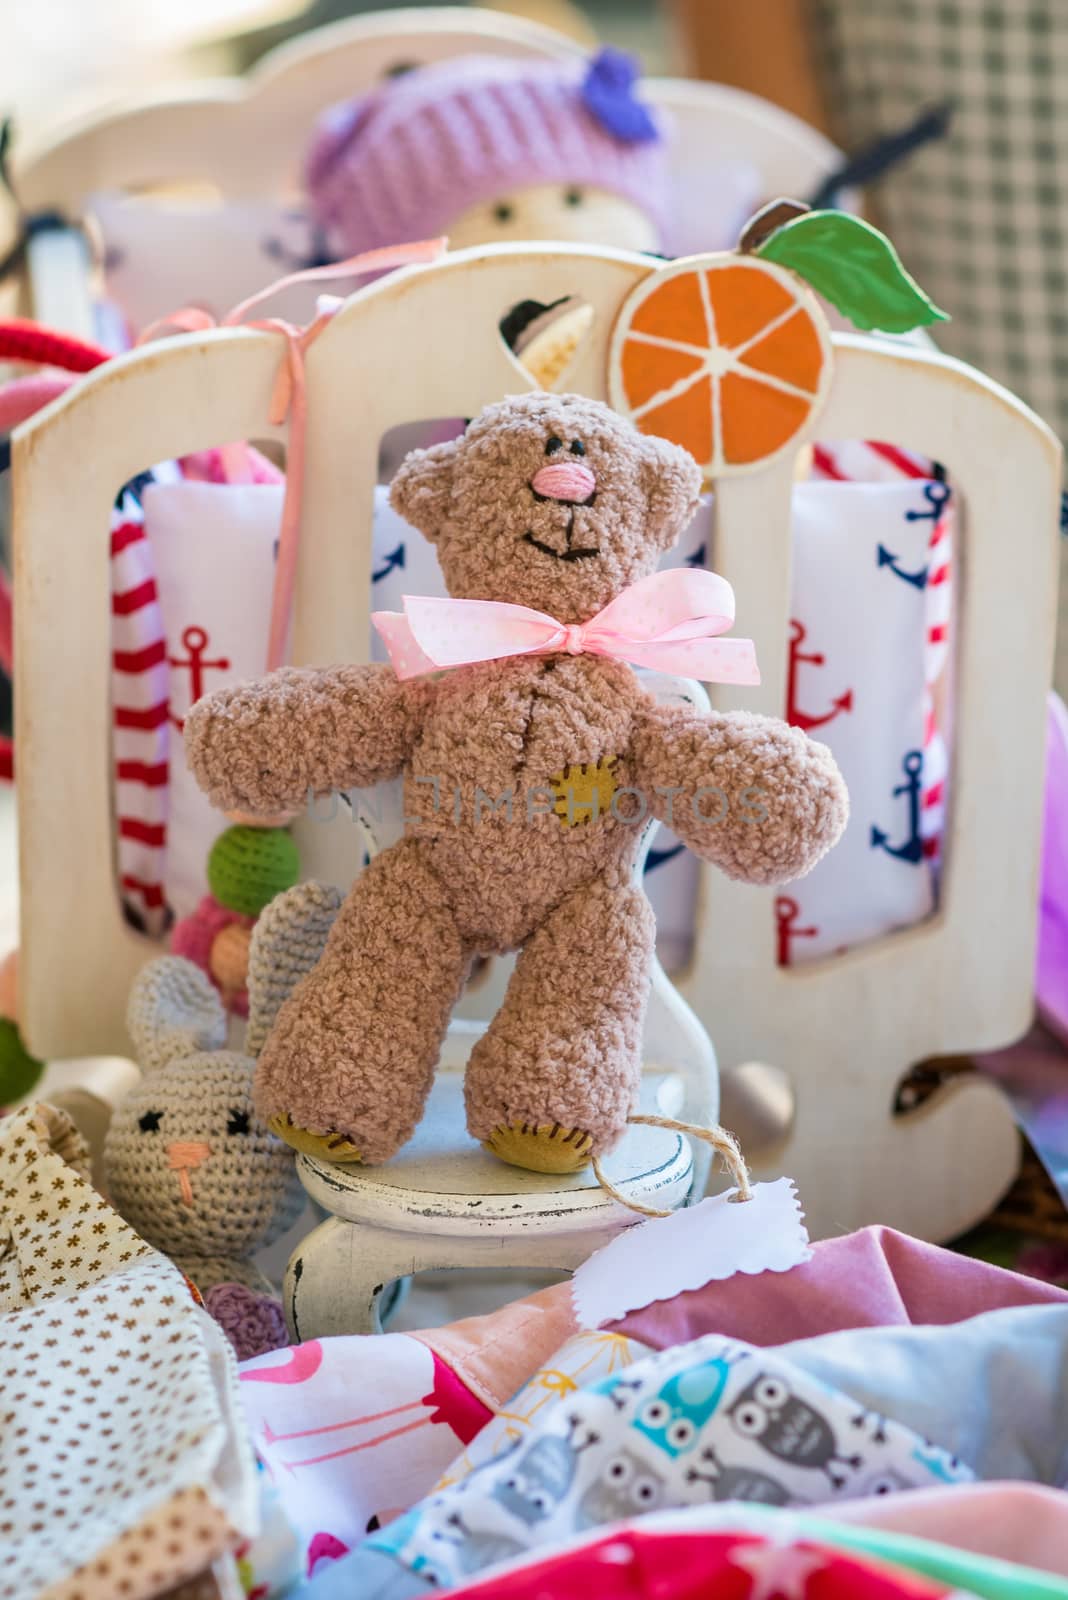 Toy bear on white wooden stool between other toys